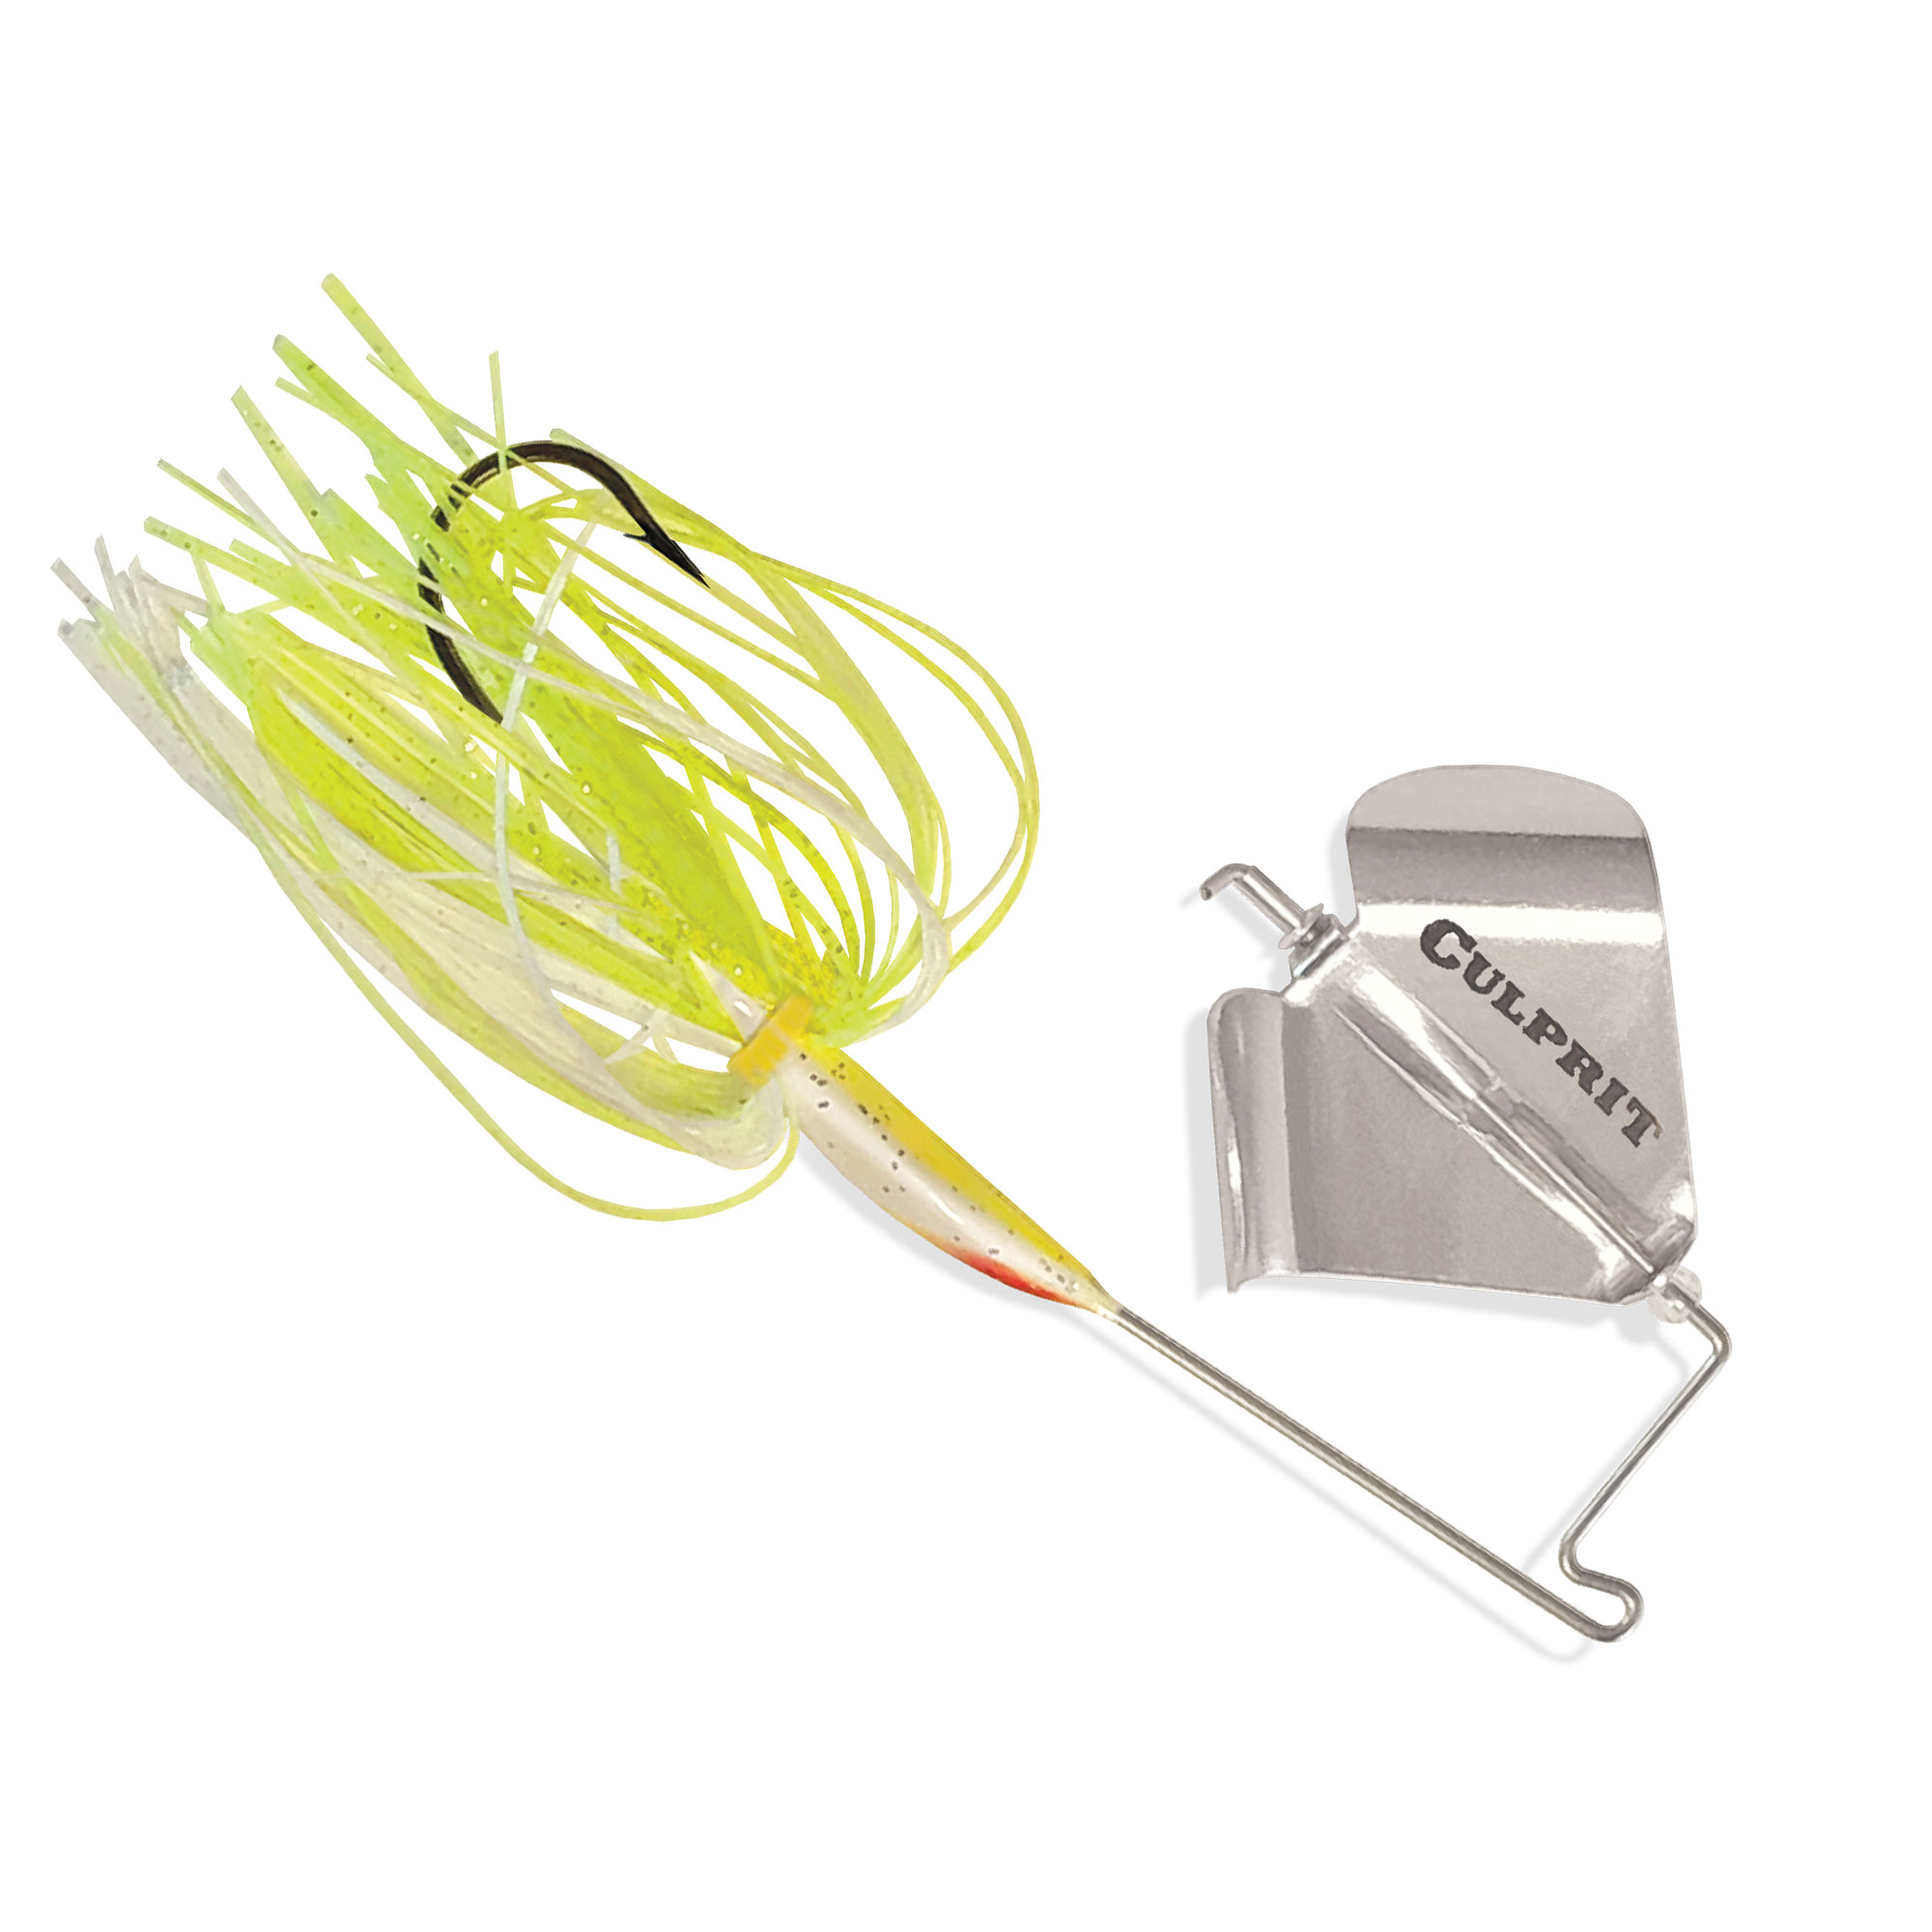 Lunker Lure Buzz-N-Frog Buzzbaits